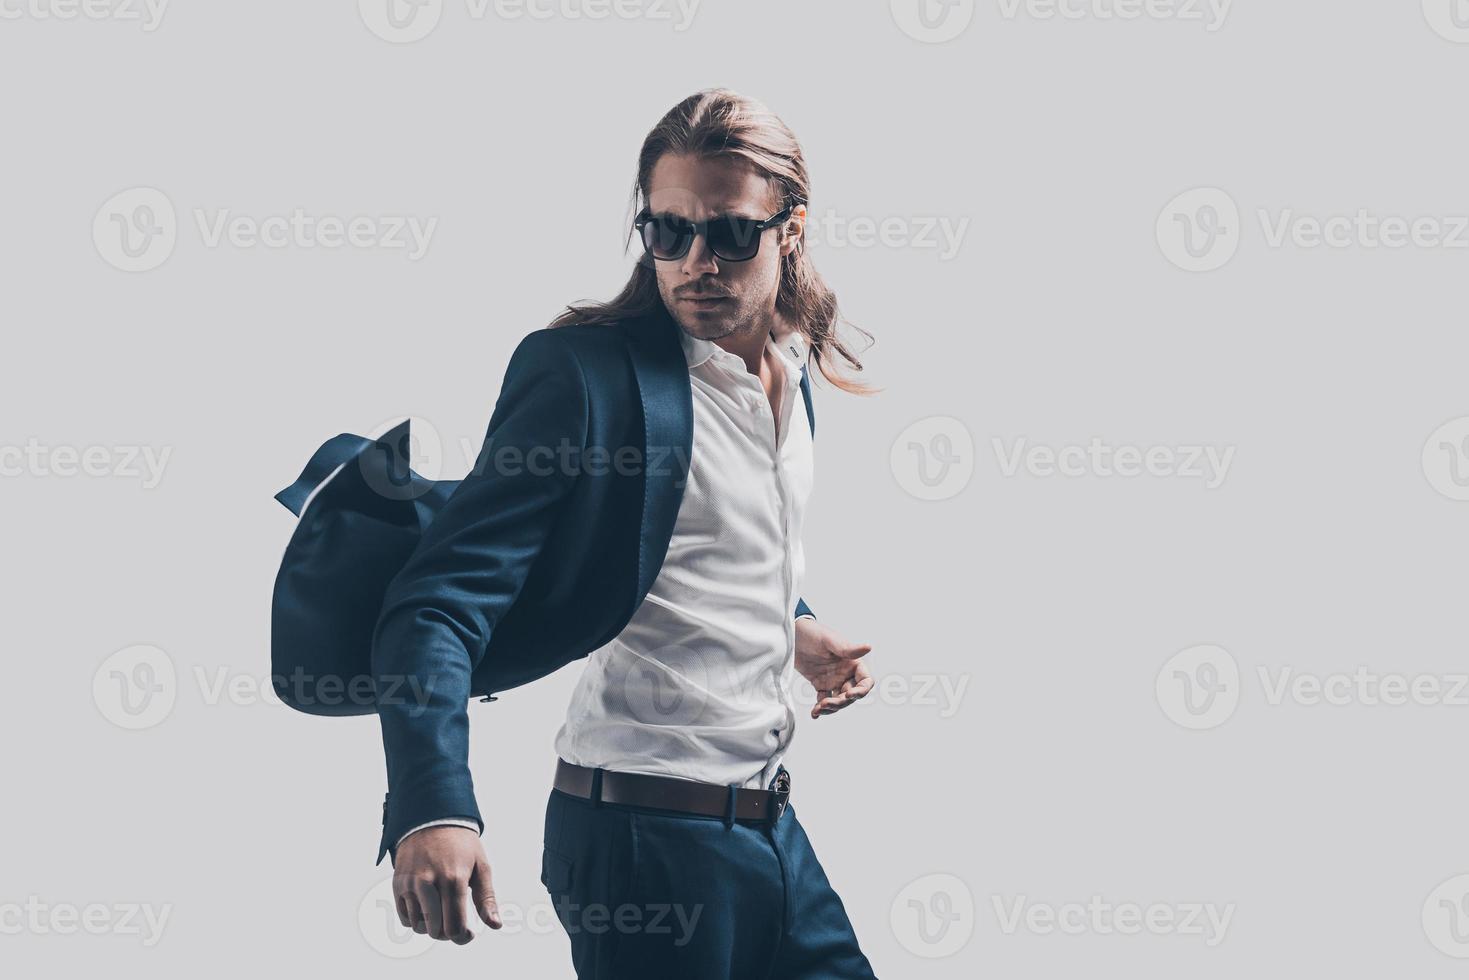 Feeling free and comfortable in his style. Handsome young man in full suit and sunglasses moving in front of grey background photo